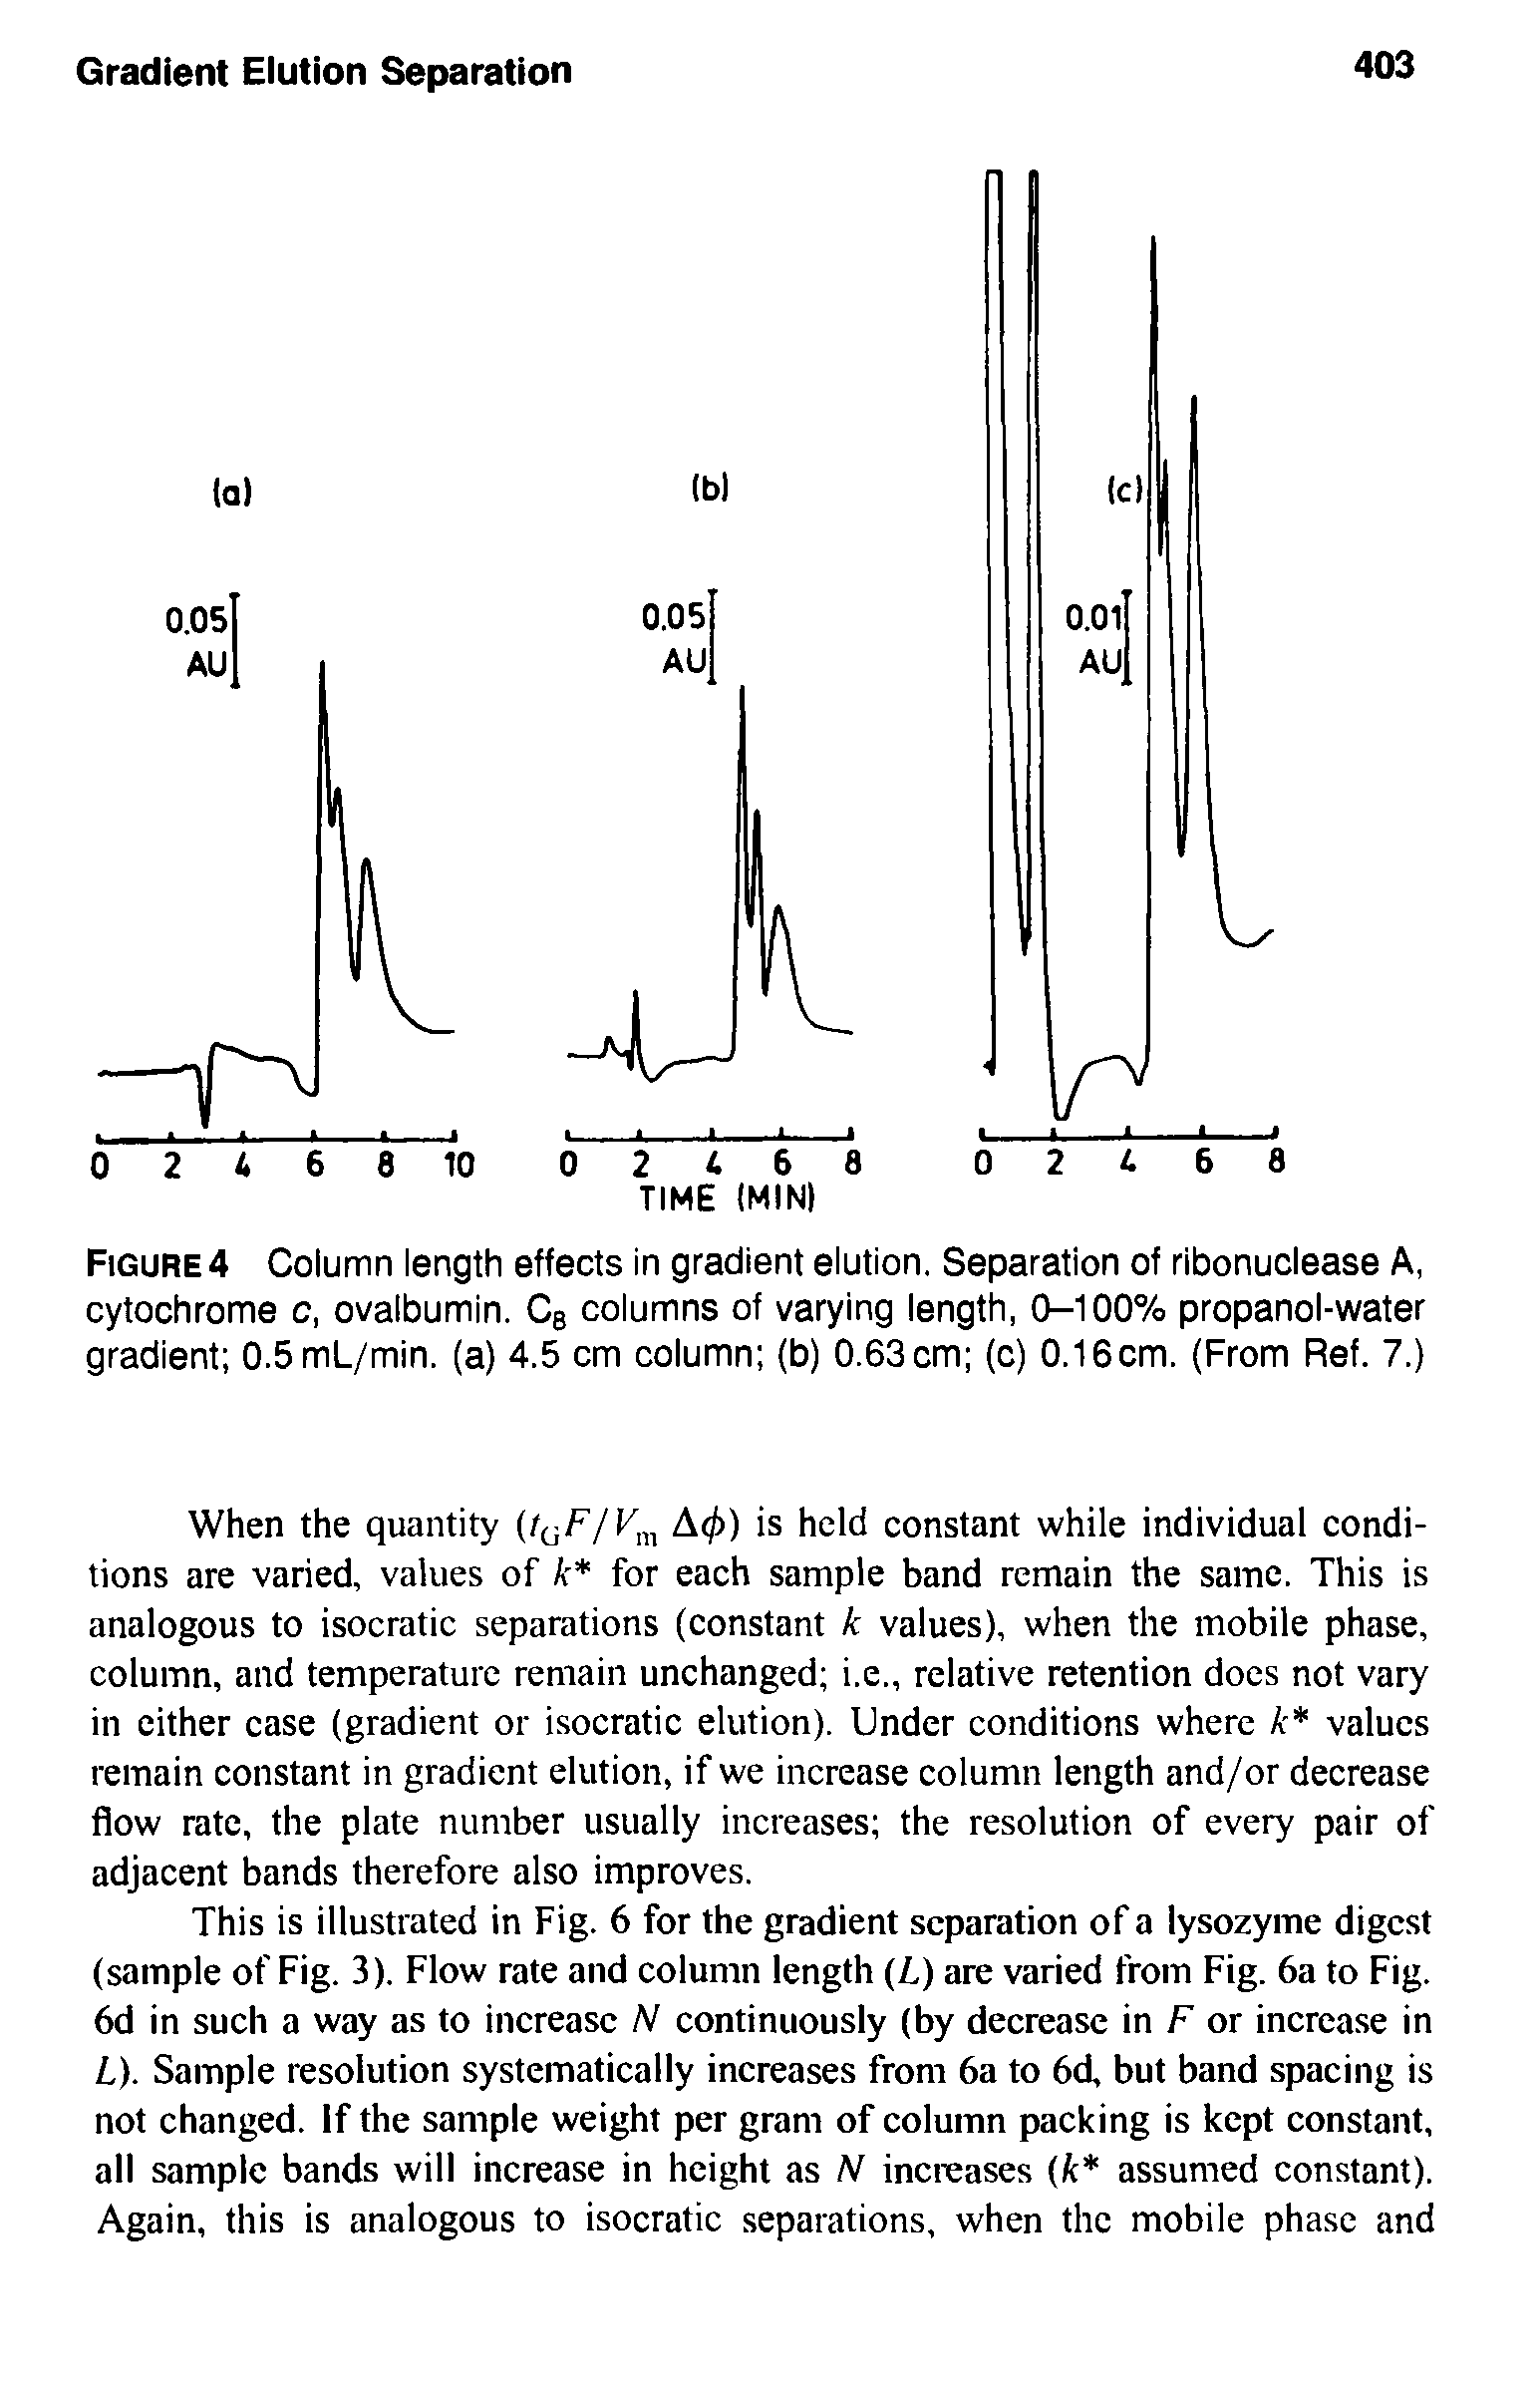 Figure 4 Column length effects in gradient elution. Separation of ribonuclease A, cytochrome c, ovalbumin. Cb columns of varying length, 0-100% propanol-water gradient 0.5mL/min. (a) 4.5 cm column (b) 0.63cm (o) 0.16cm. (From Ref. 7.)...